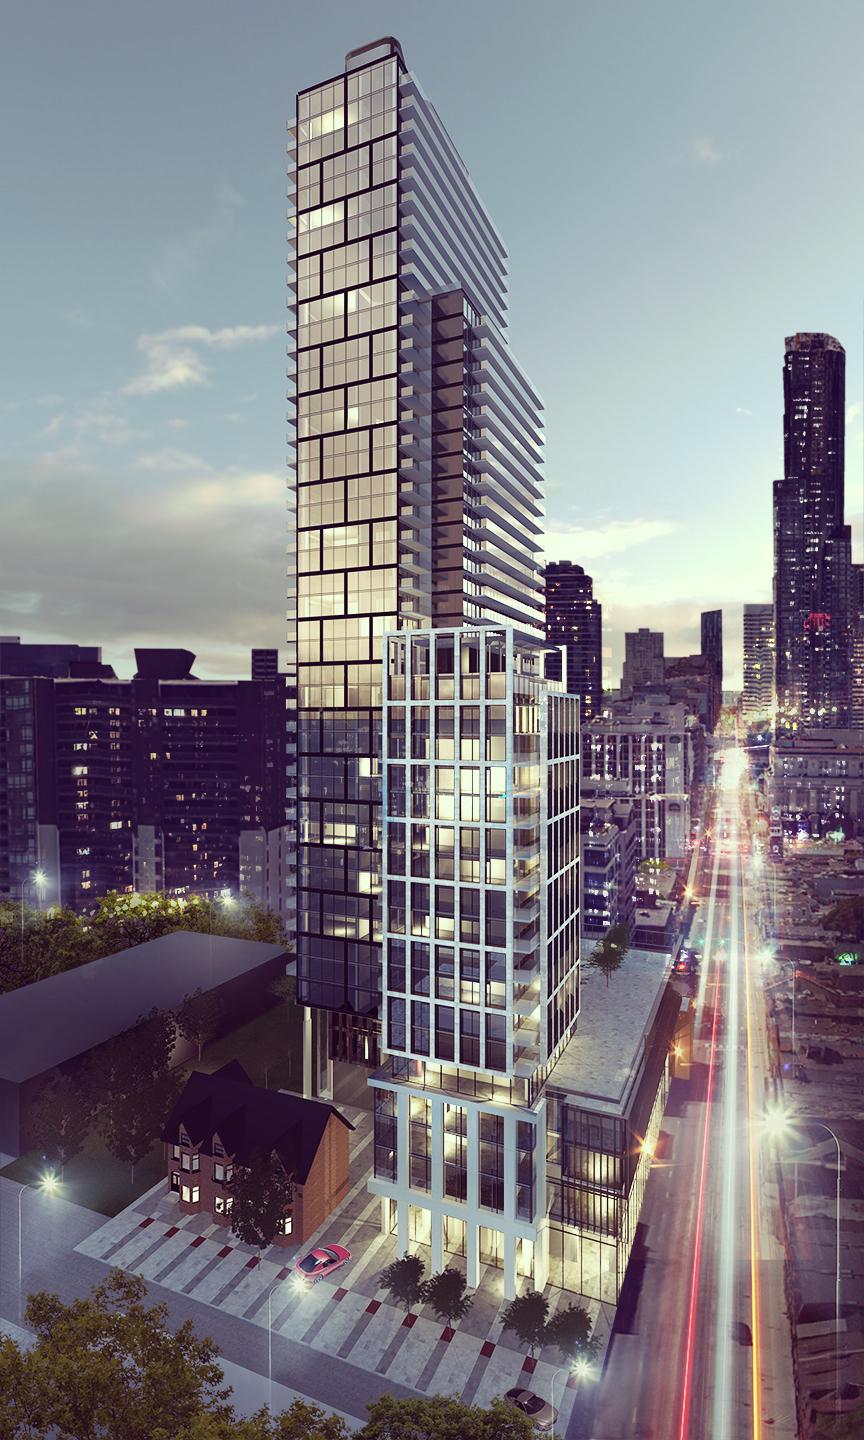 The Clover on Yonge, designed by architectsAlliance for Cresford Developments